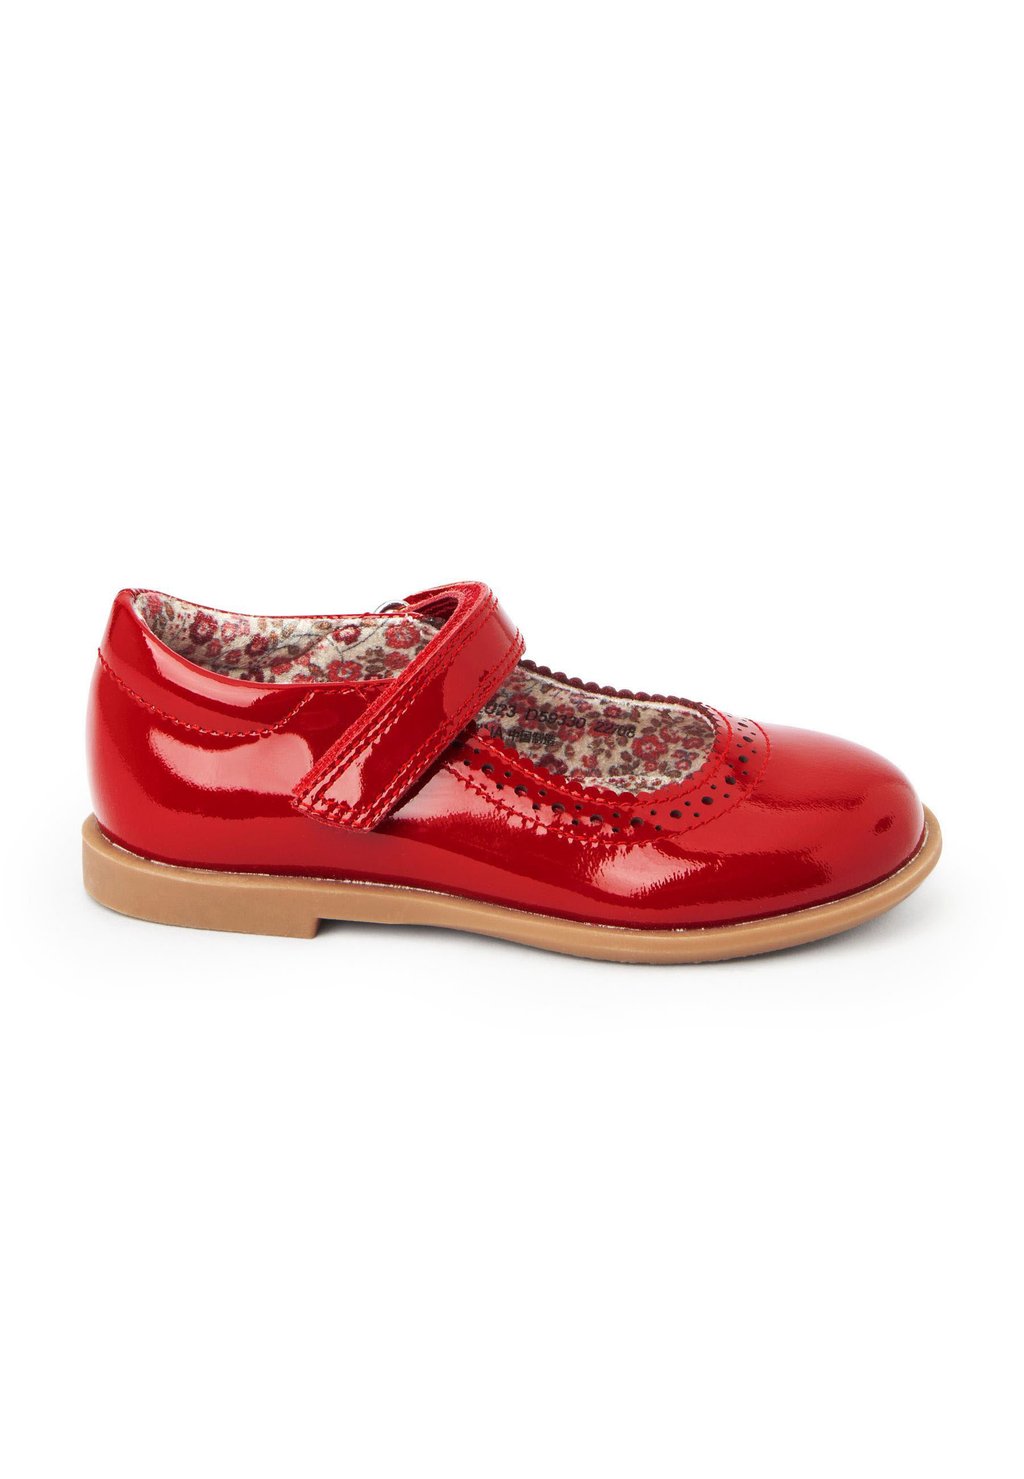 Балетки MARY JANE Next, цвет red patent leather mary jane shoes fashion leather child shoes